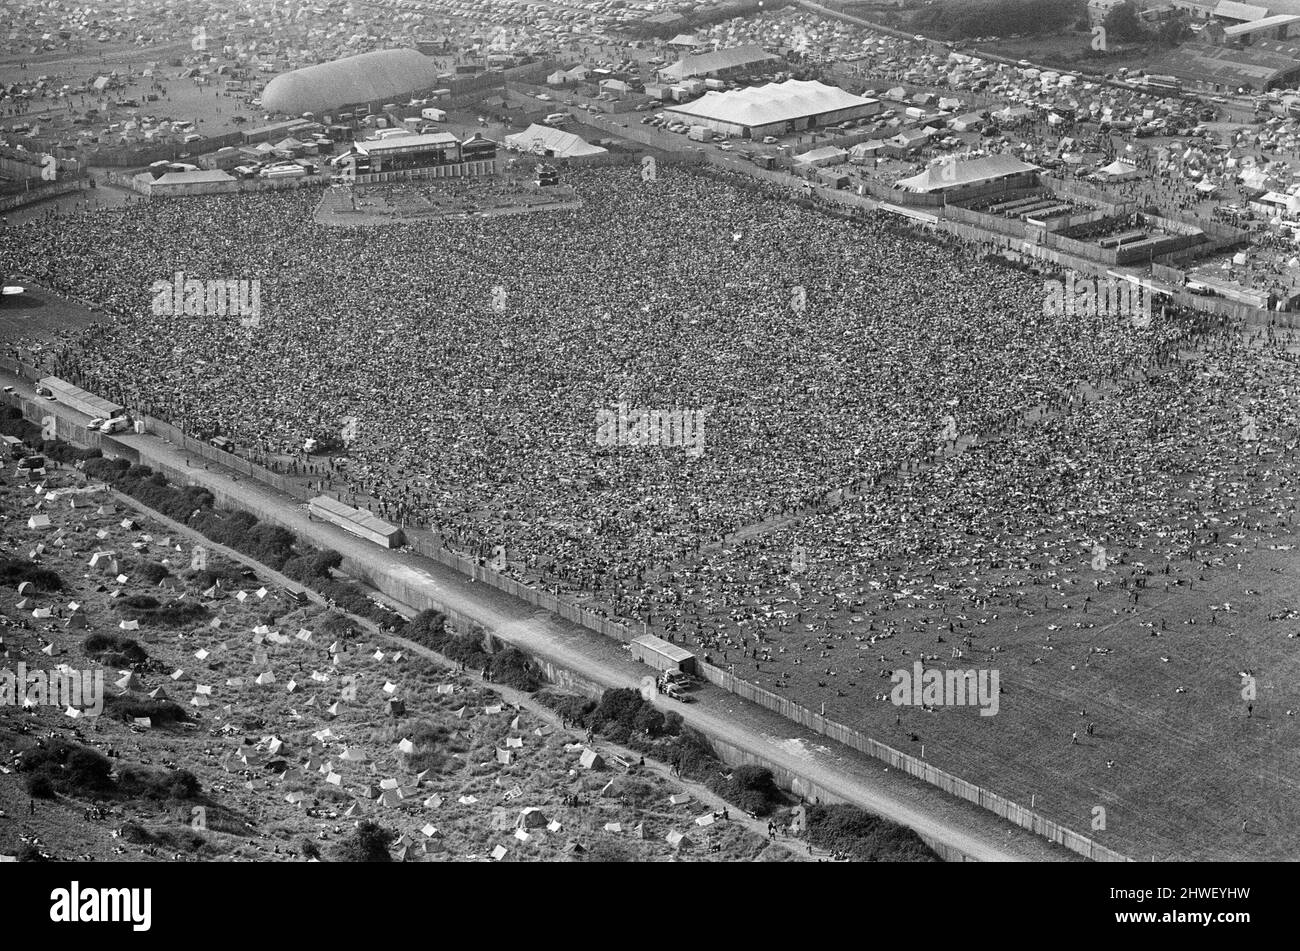 An aerial view of the 120,000 pop fans massed together at Freshwater on the Isle of Wight for the weekend pop festival. Pictures show the performance area and tented section. 28th August 1970. Stock Photo